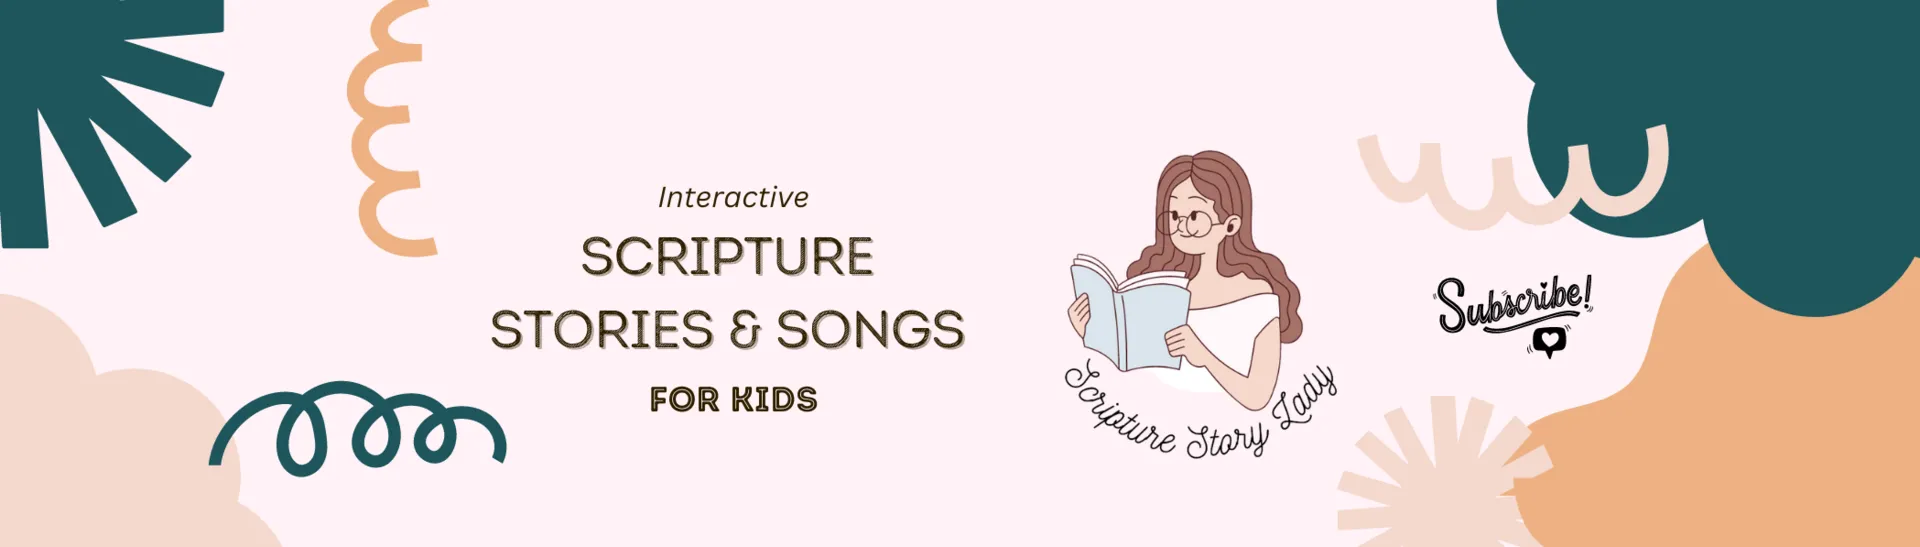 interactive scripture stories & songs for kids